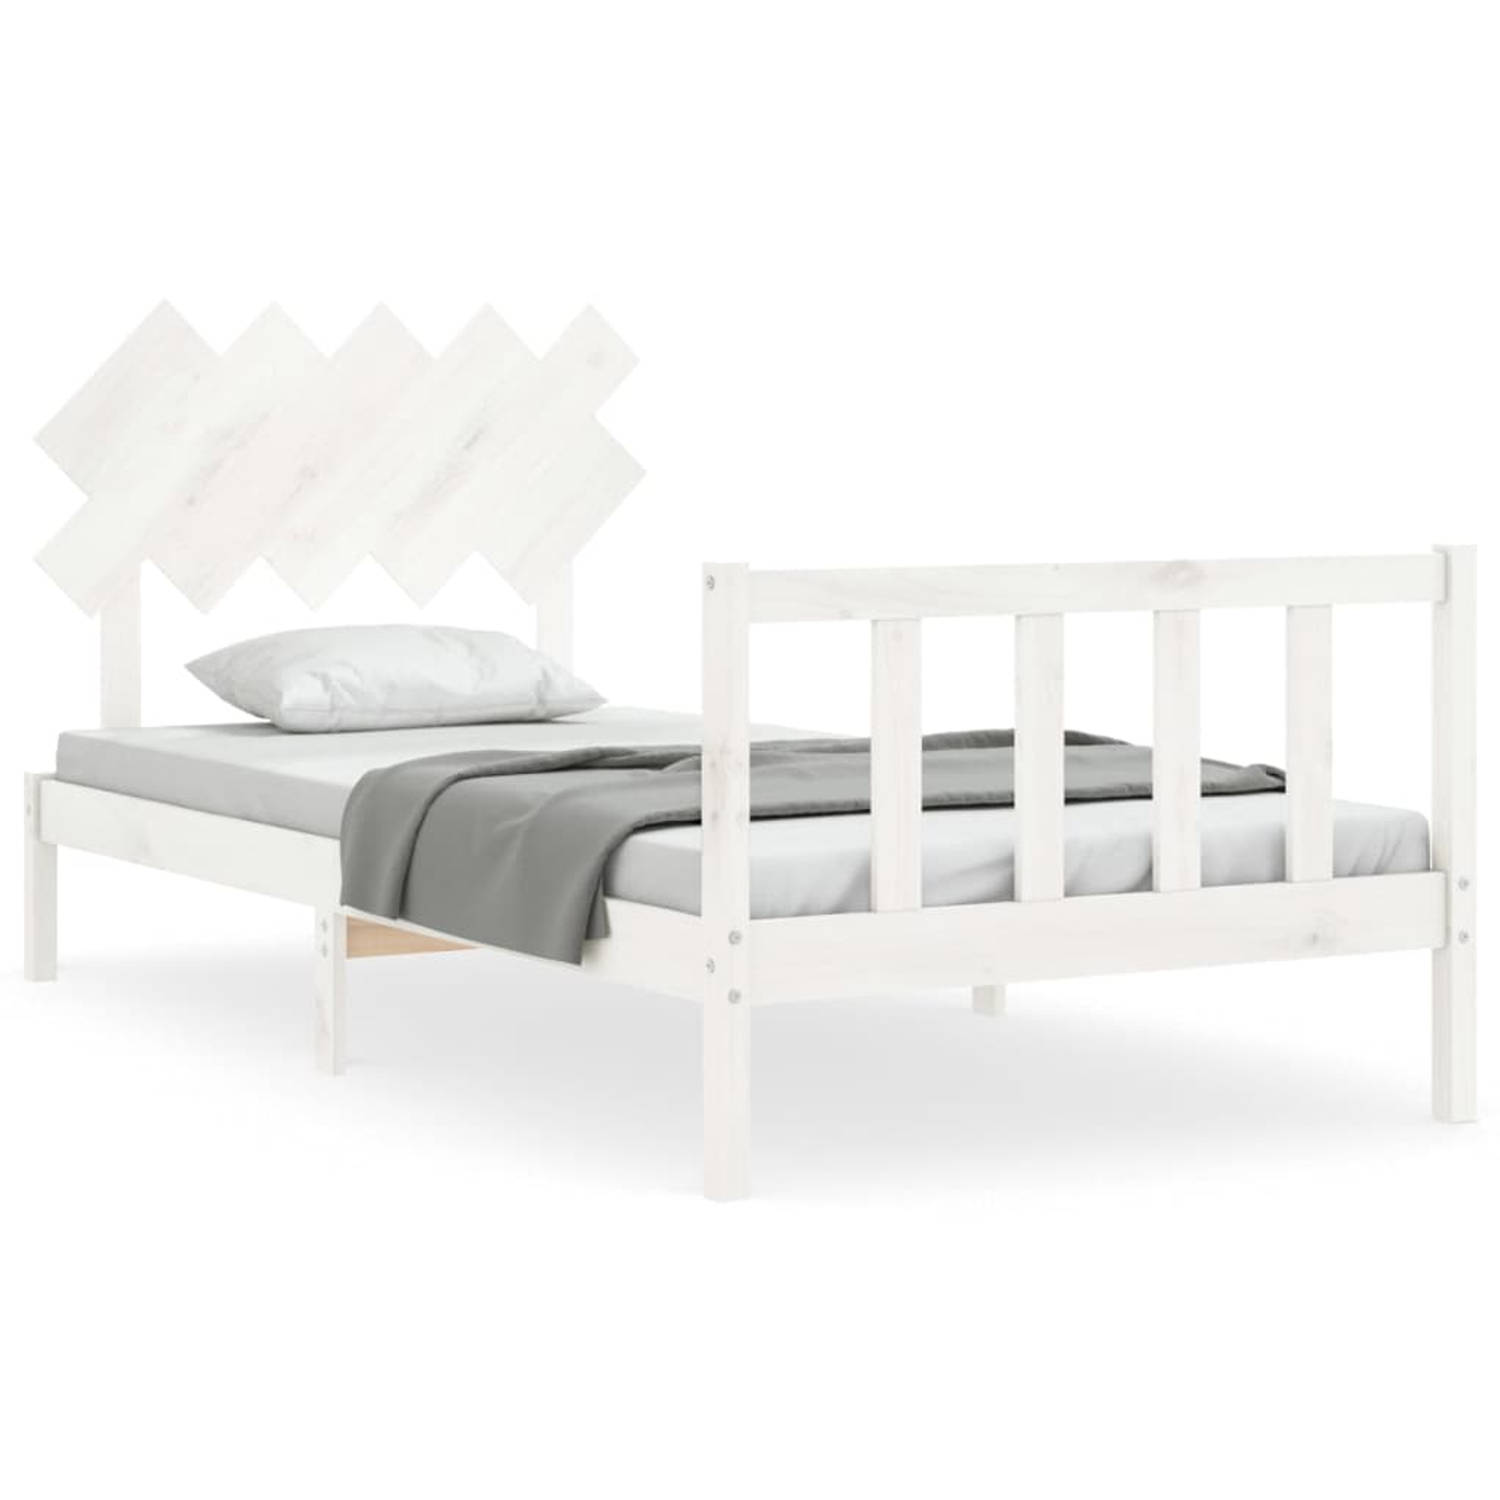 The Living Store Bedframe - Massief grenenhout - 205.5 x 105.5 x 81 cm - Wit